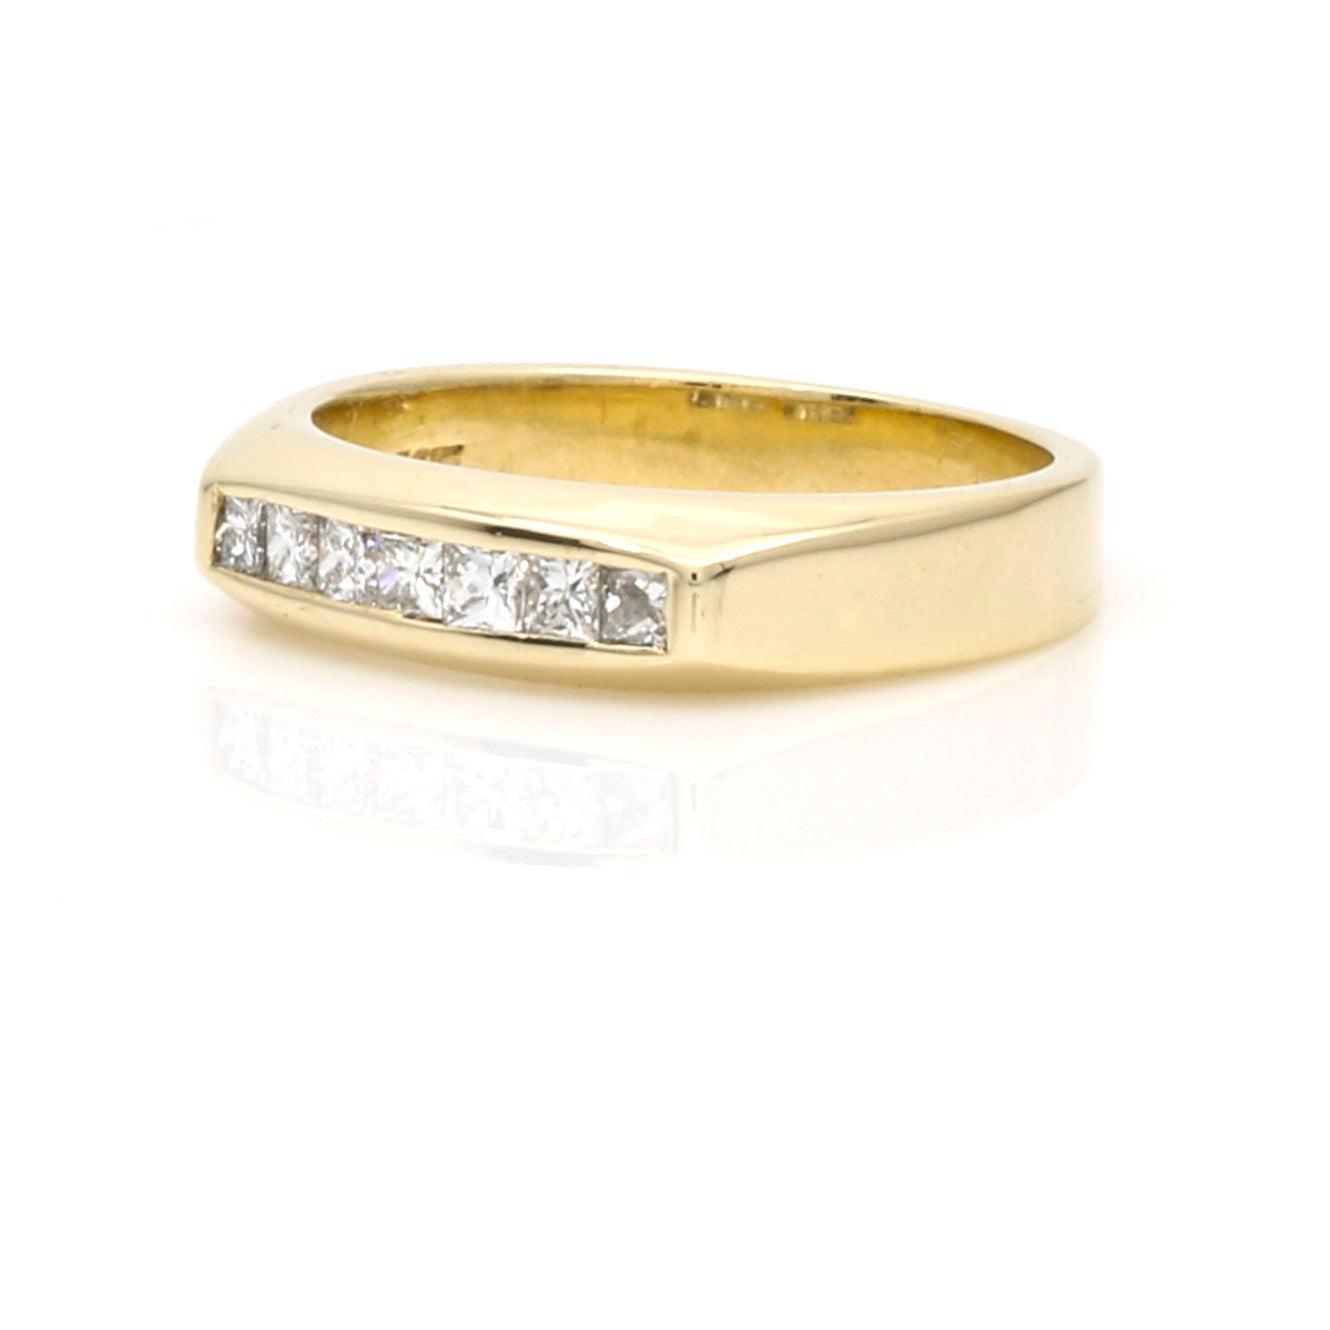 Men's Princess-Cut Diamond Channel Band Ring in 14k Yellow Gold 1.00 cttw - 31 Jewels Inc.